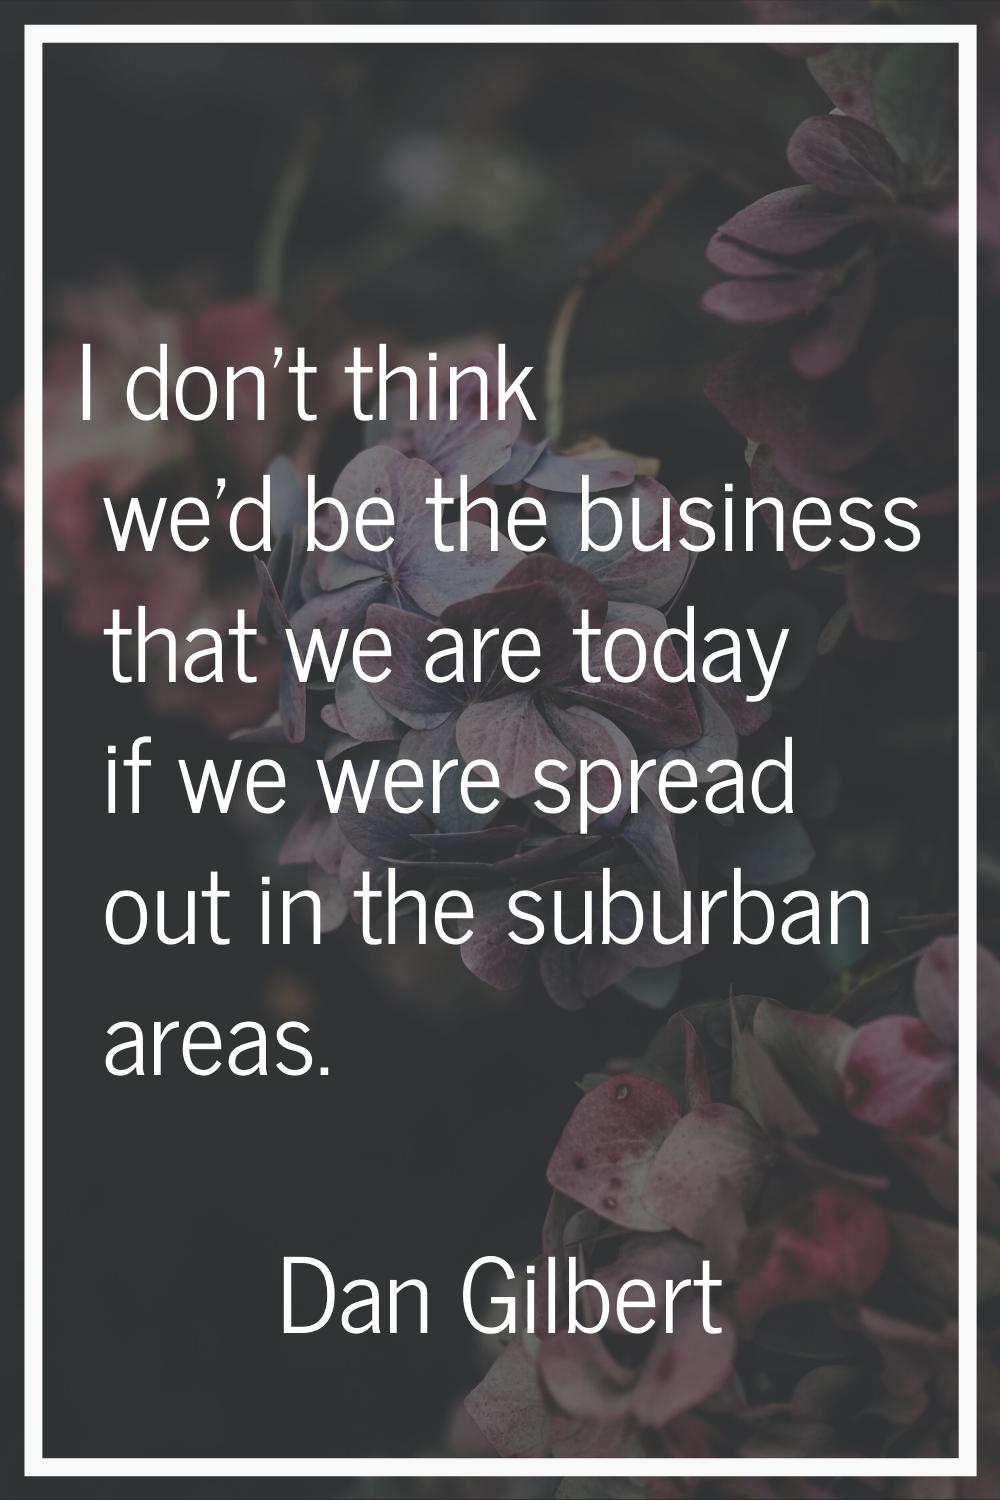 I don't think we'd be the business that we are today if we were spread out in the suburban areas.